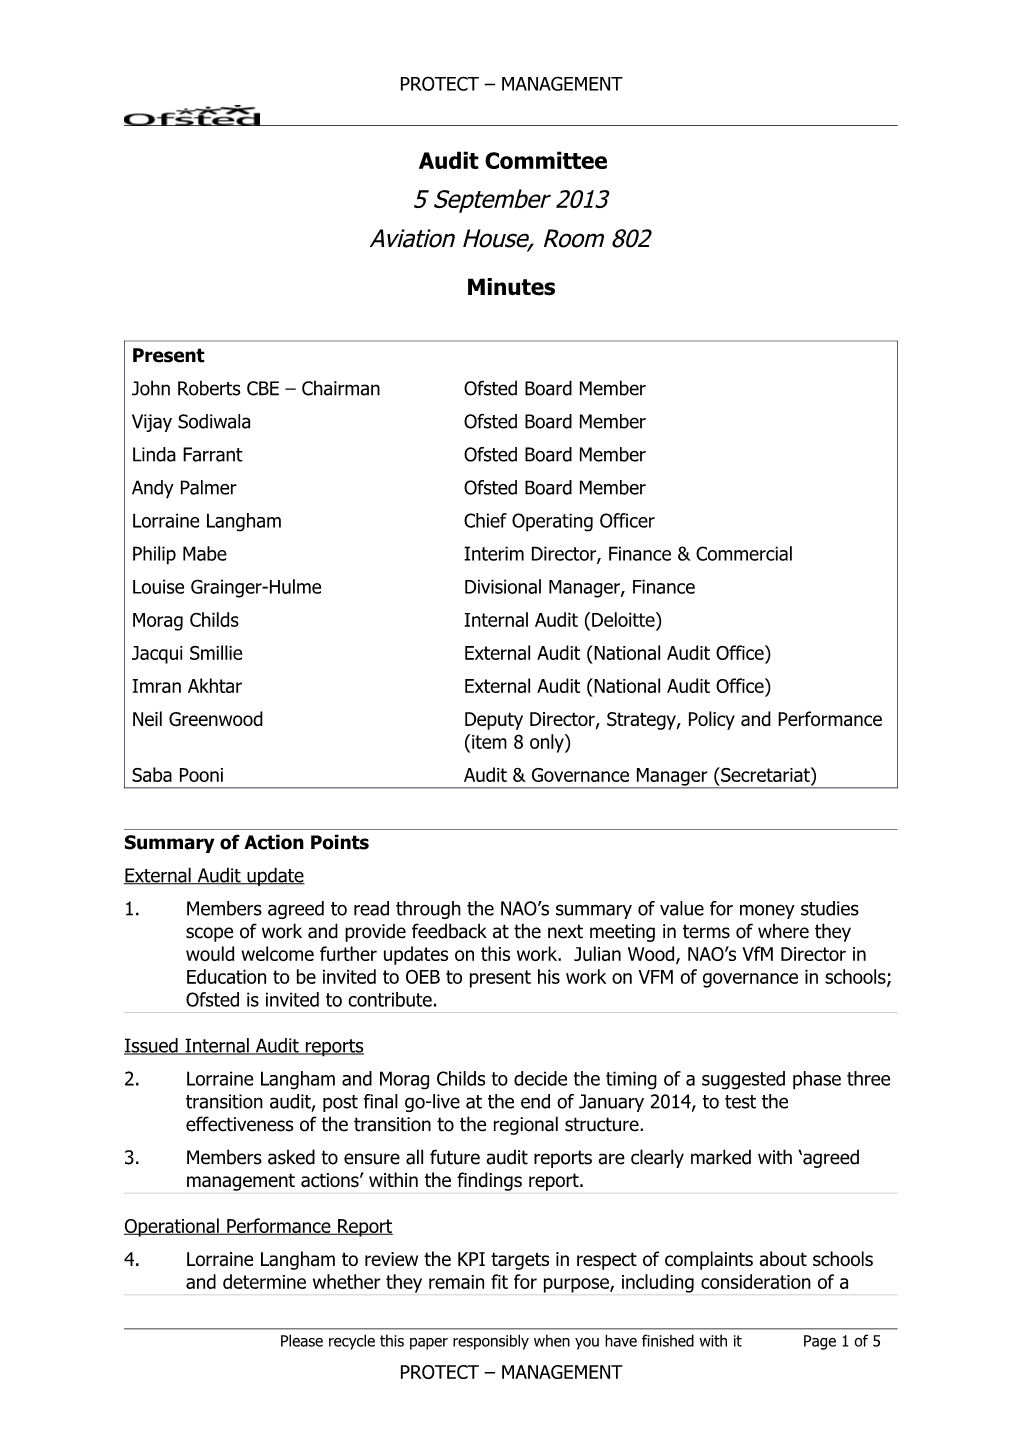 Audit Committee Minutes s1